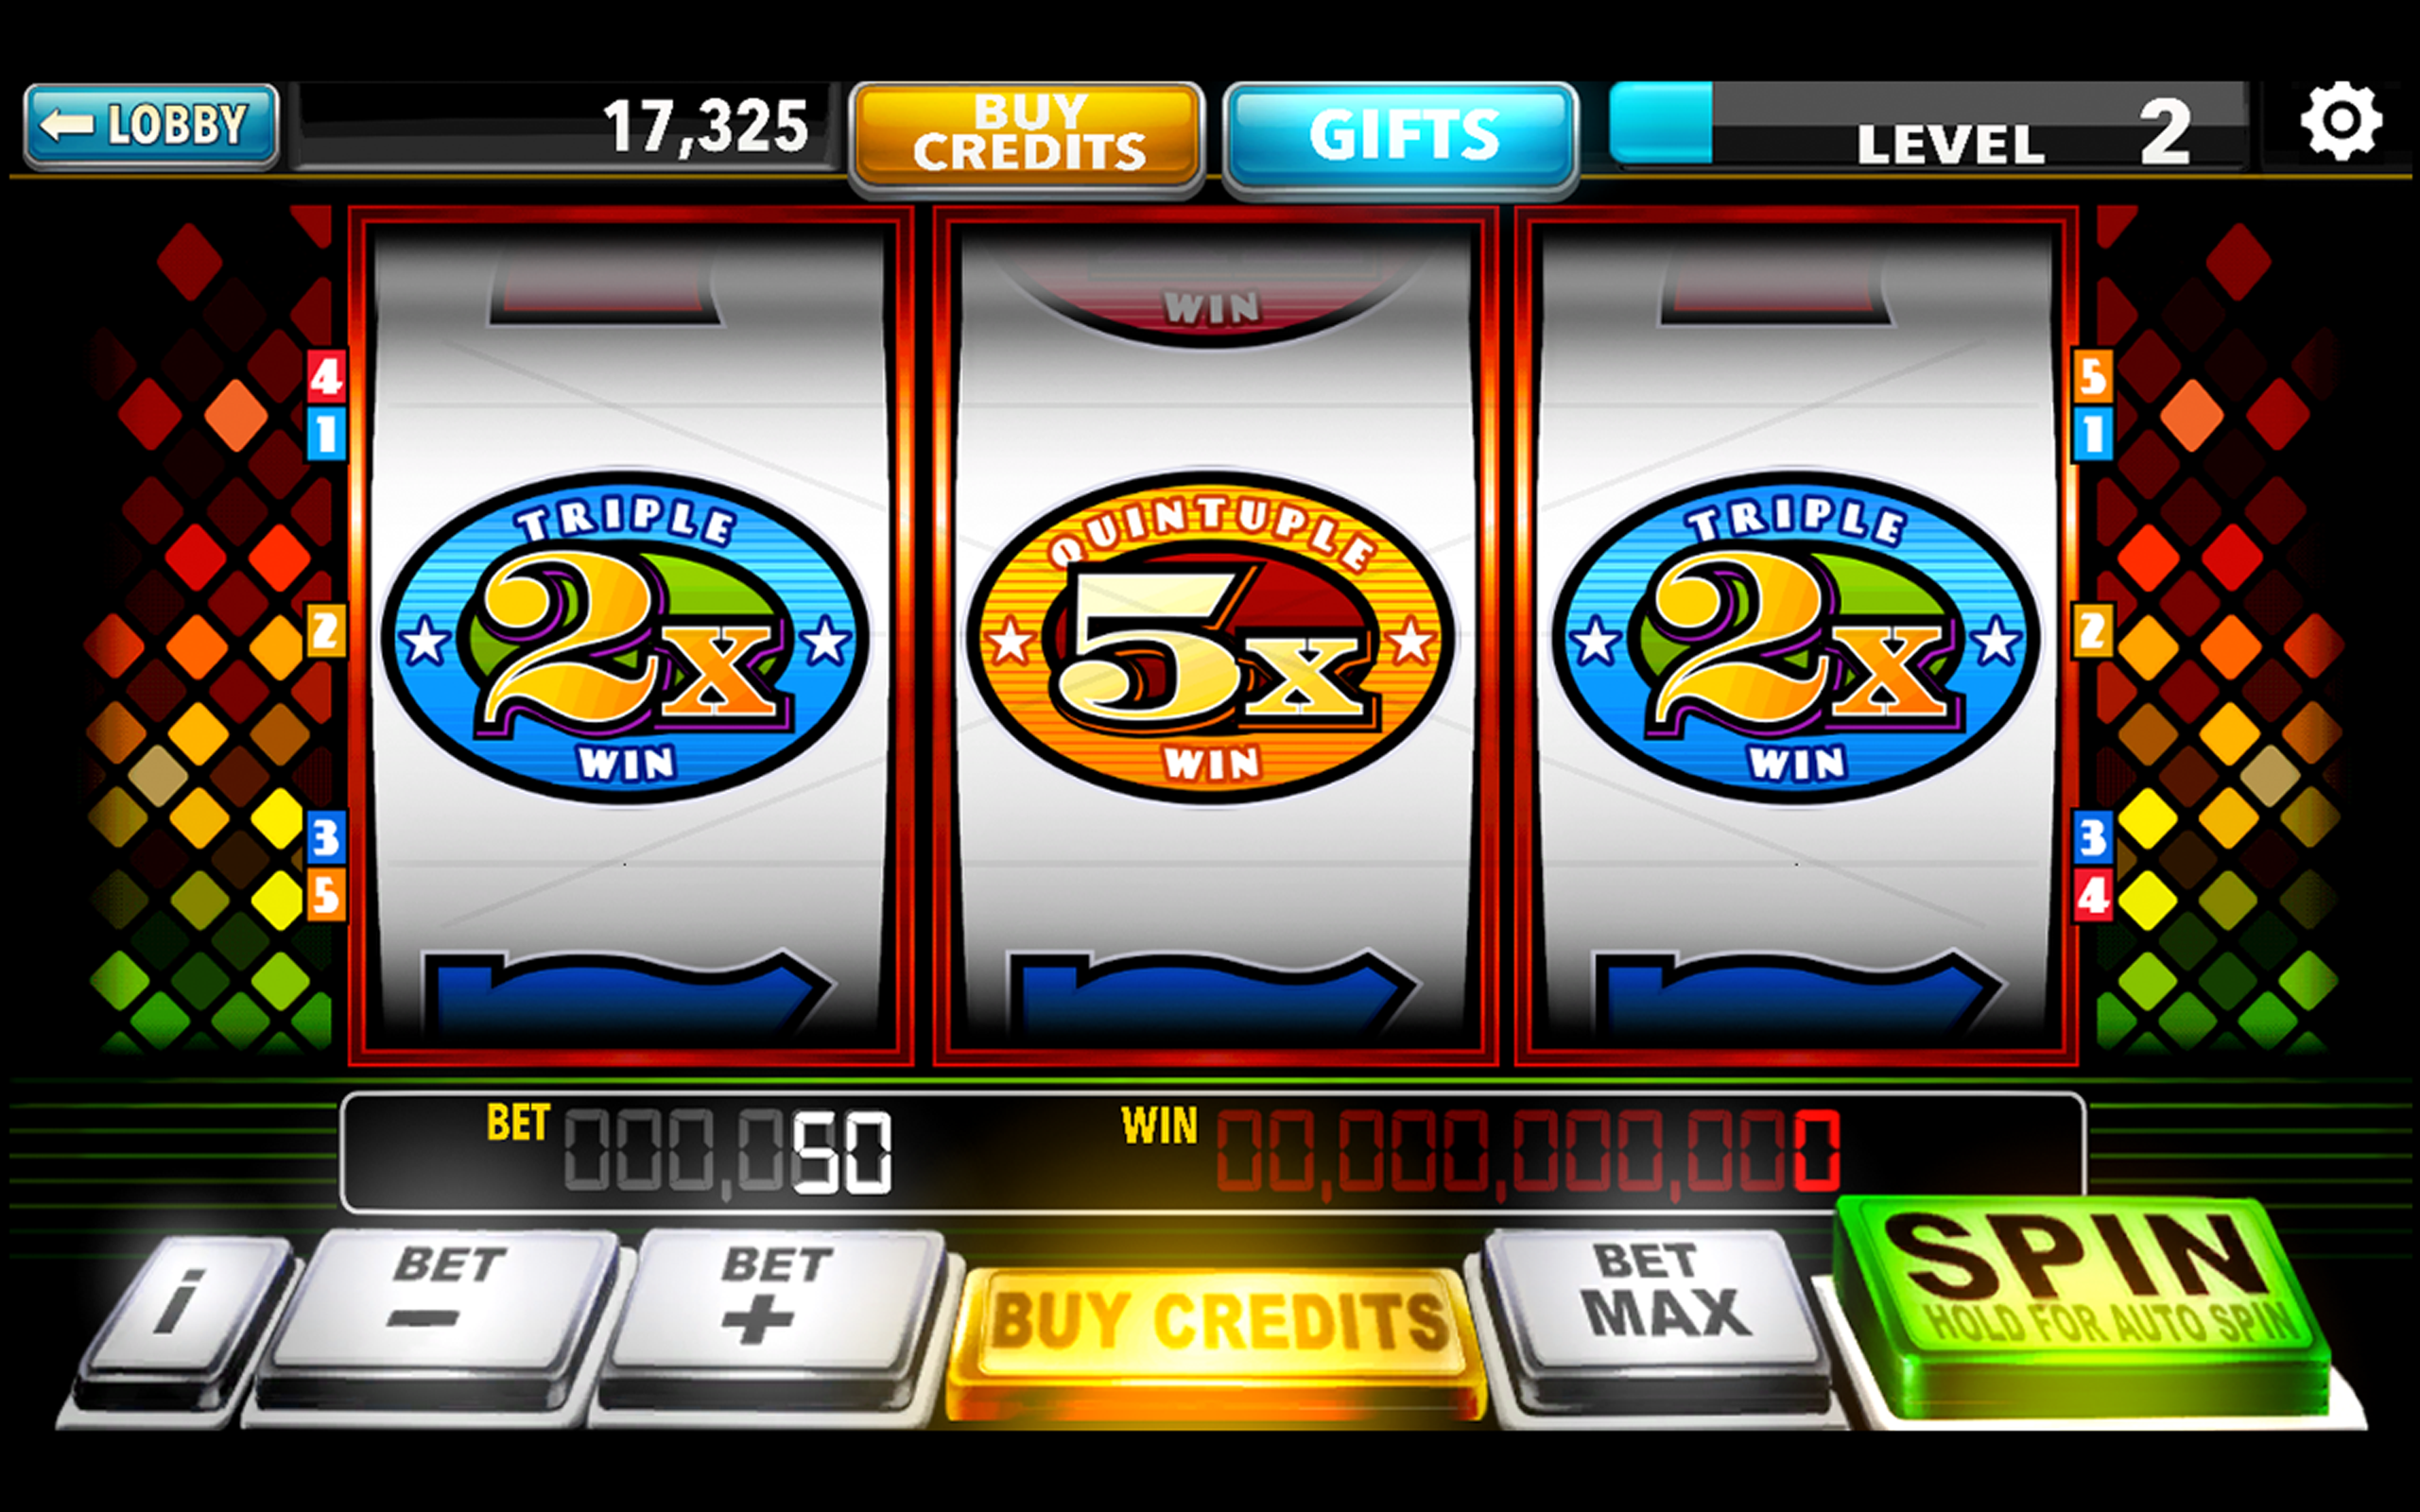 Play Our Range Of Online Slots